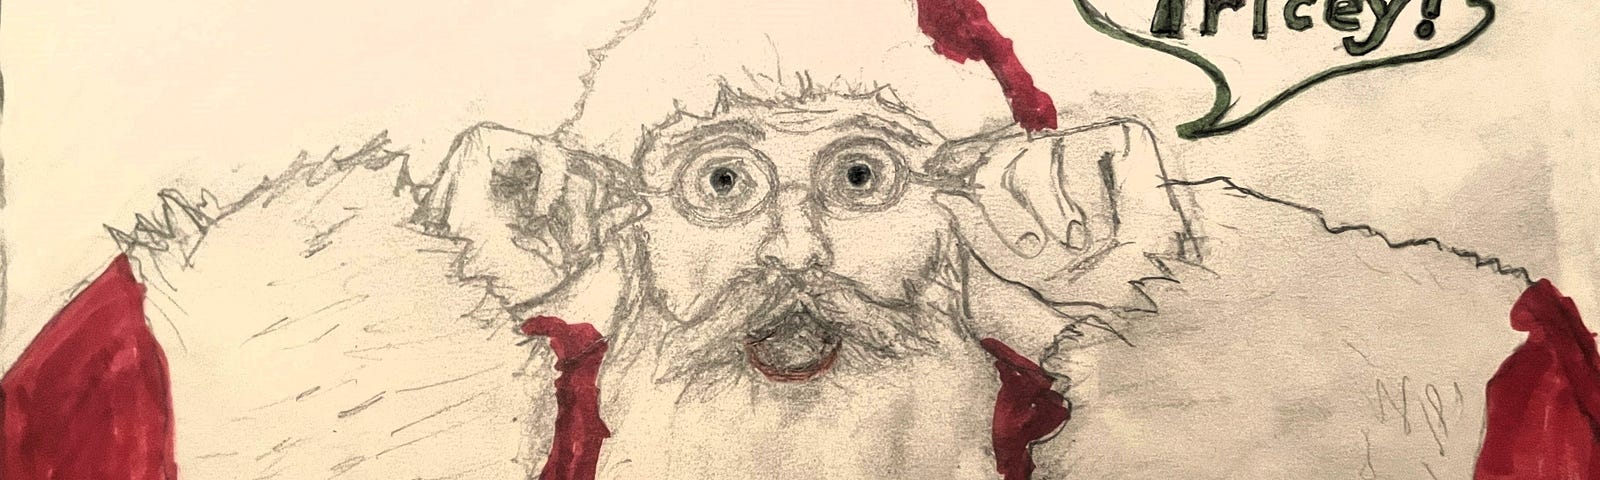 Drawing of Santa Clause with a surprised expression on his face. Santa is saying “That’s too pricey!”